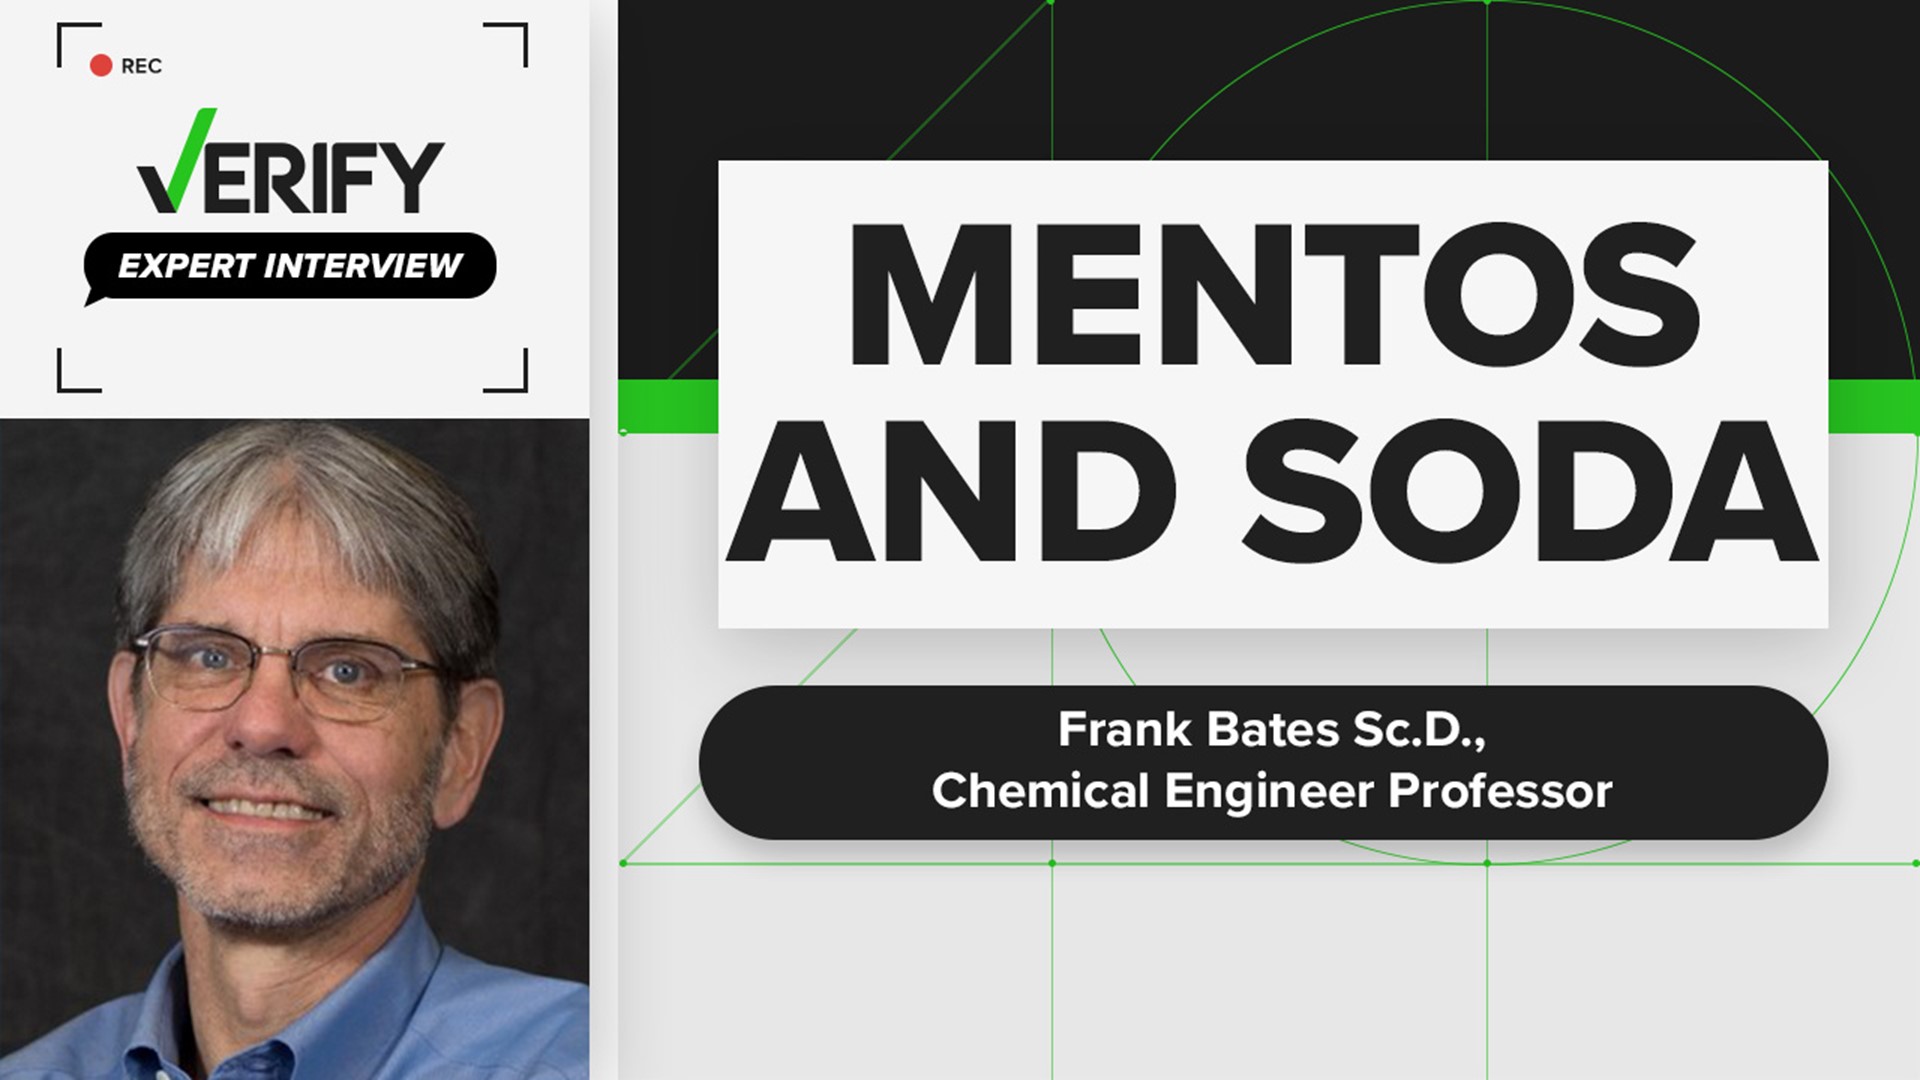 VERIFY spoke with Frank Bates, a chemical engineer professor, to explain the phenomenon behind putting Mentos in soda.